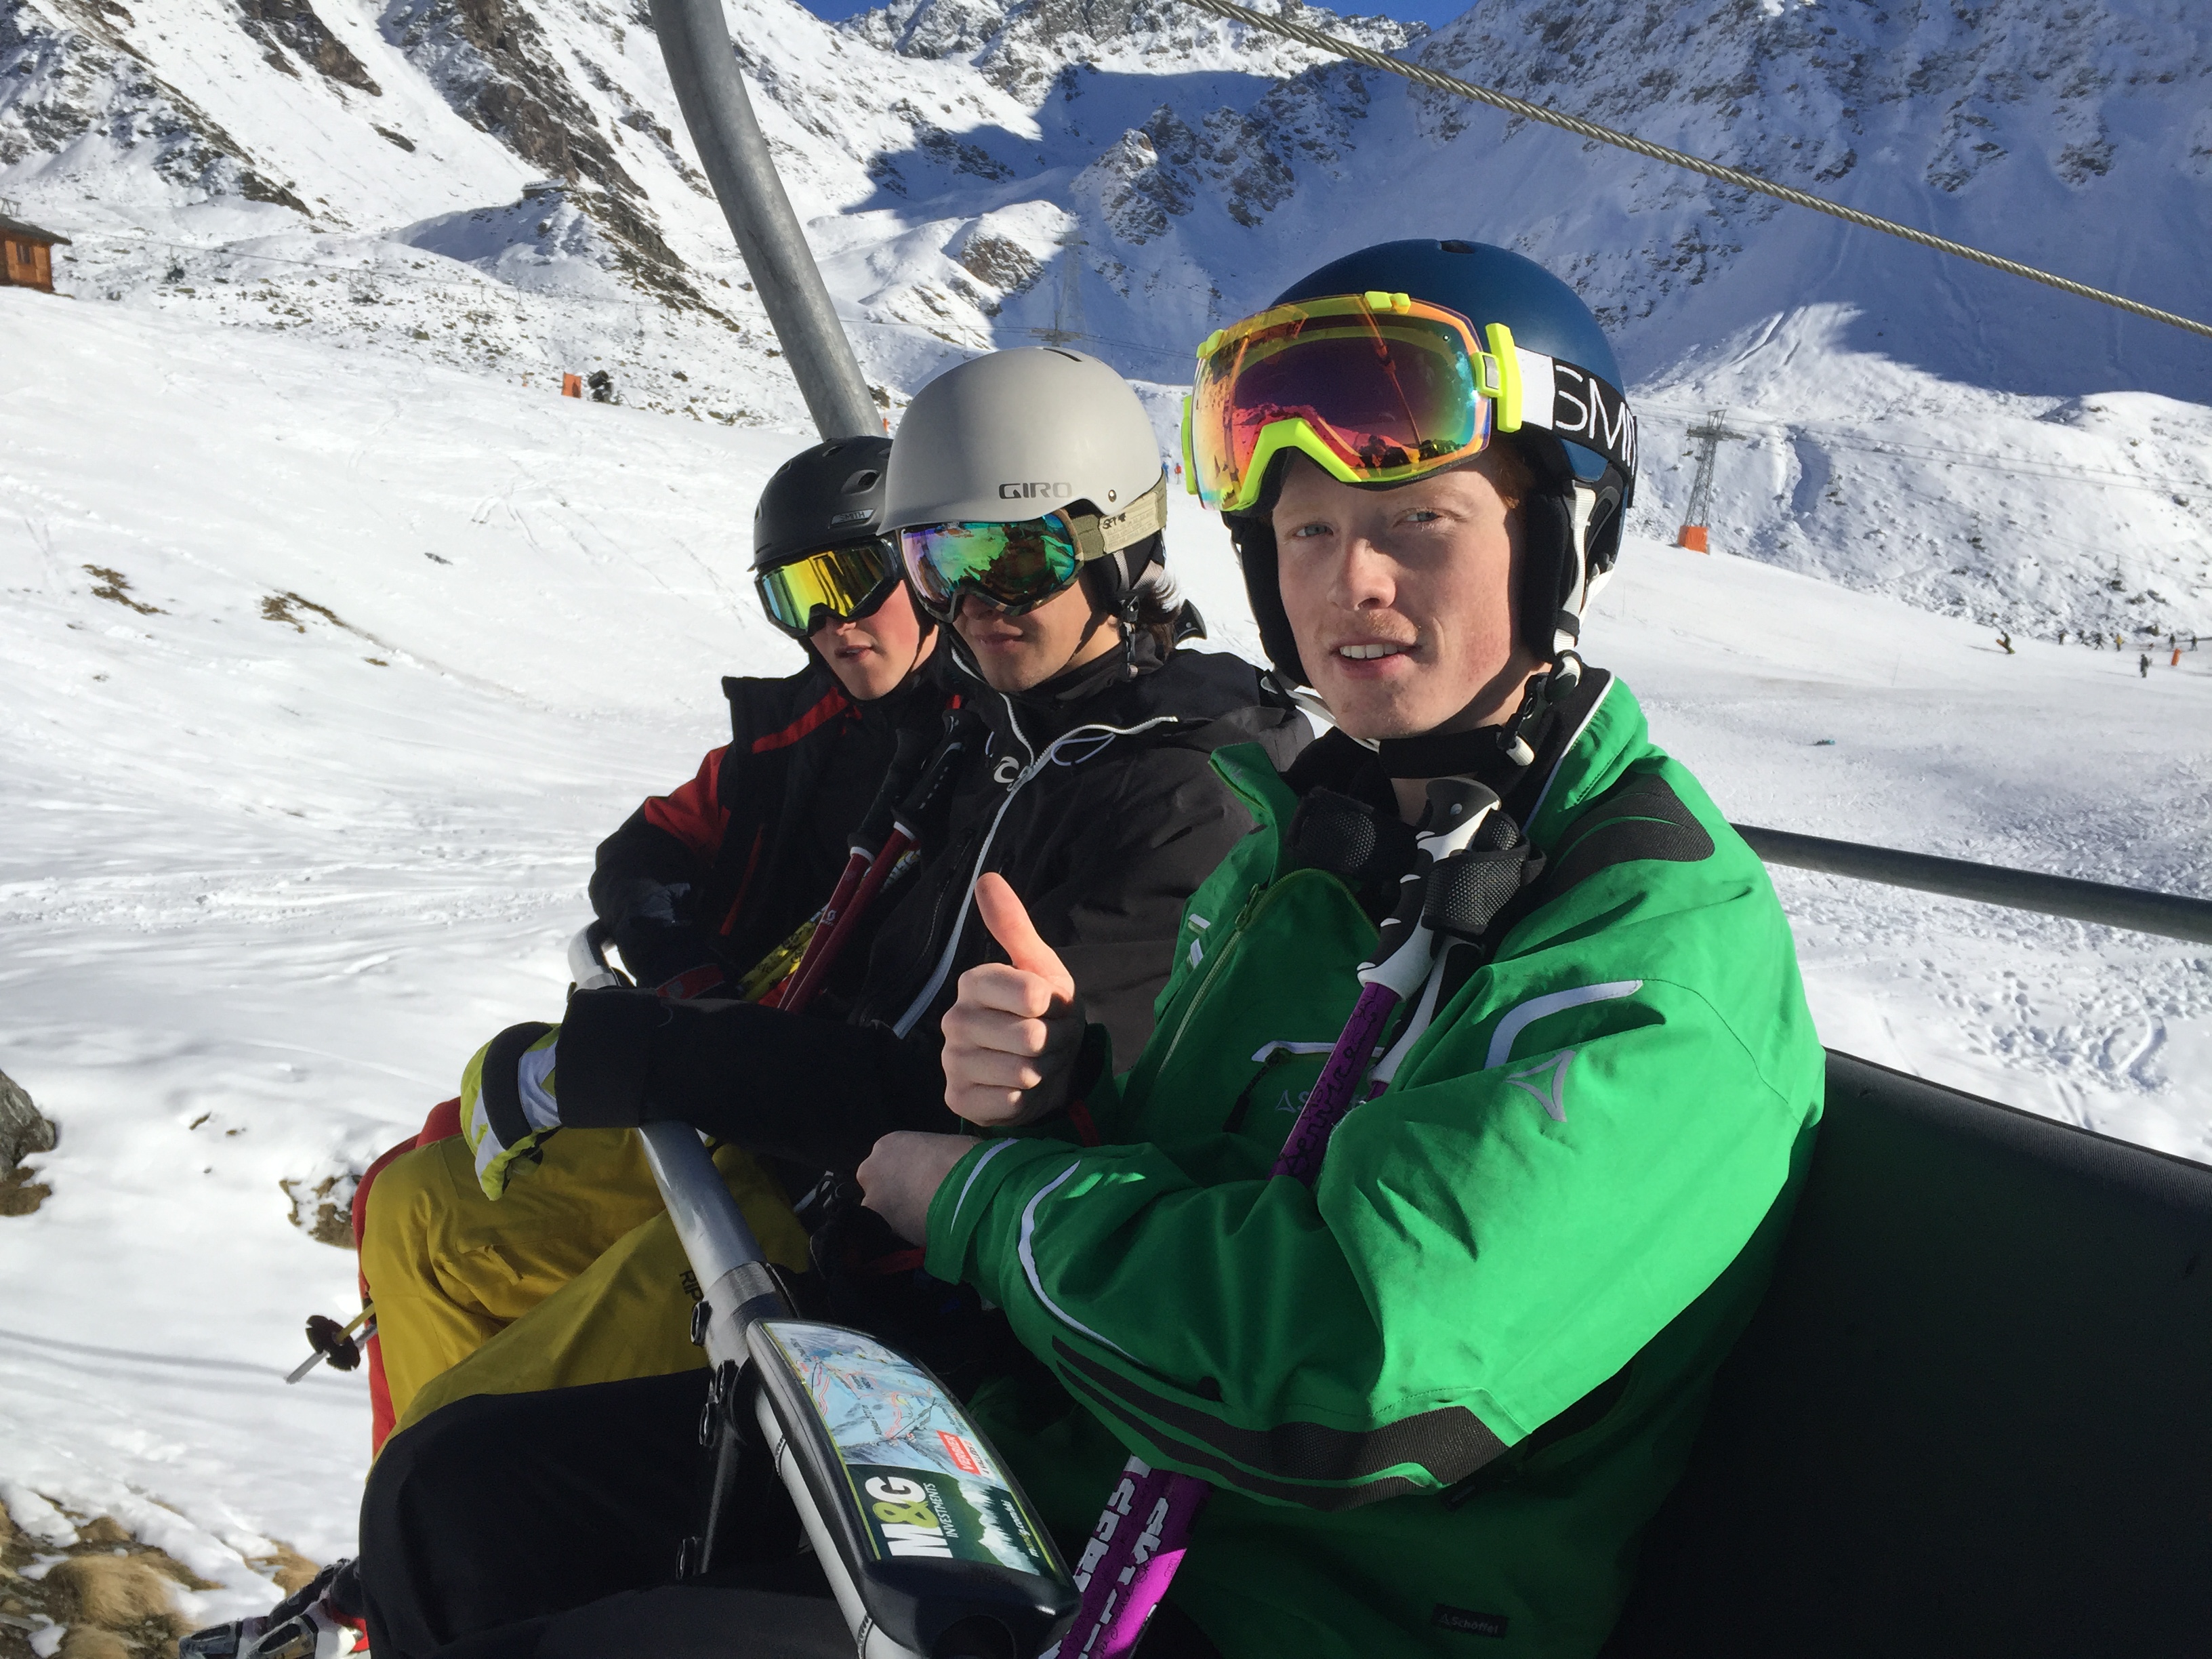 VERBIER 10 WEEK SKI INSTRUCTOR COURSE 2015: BASI LEVEL 1, AVALANCHE TRAINING AND FIRST AID (WEEK 3)